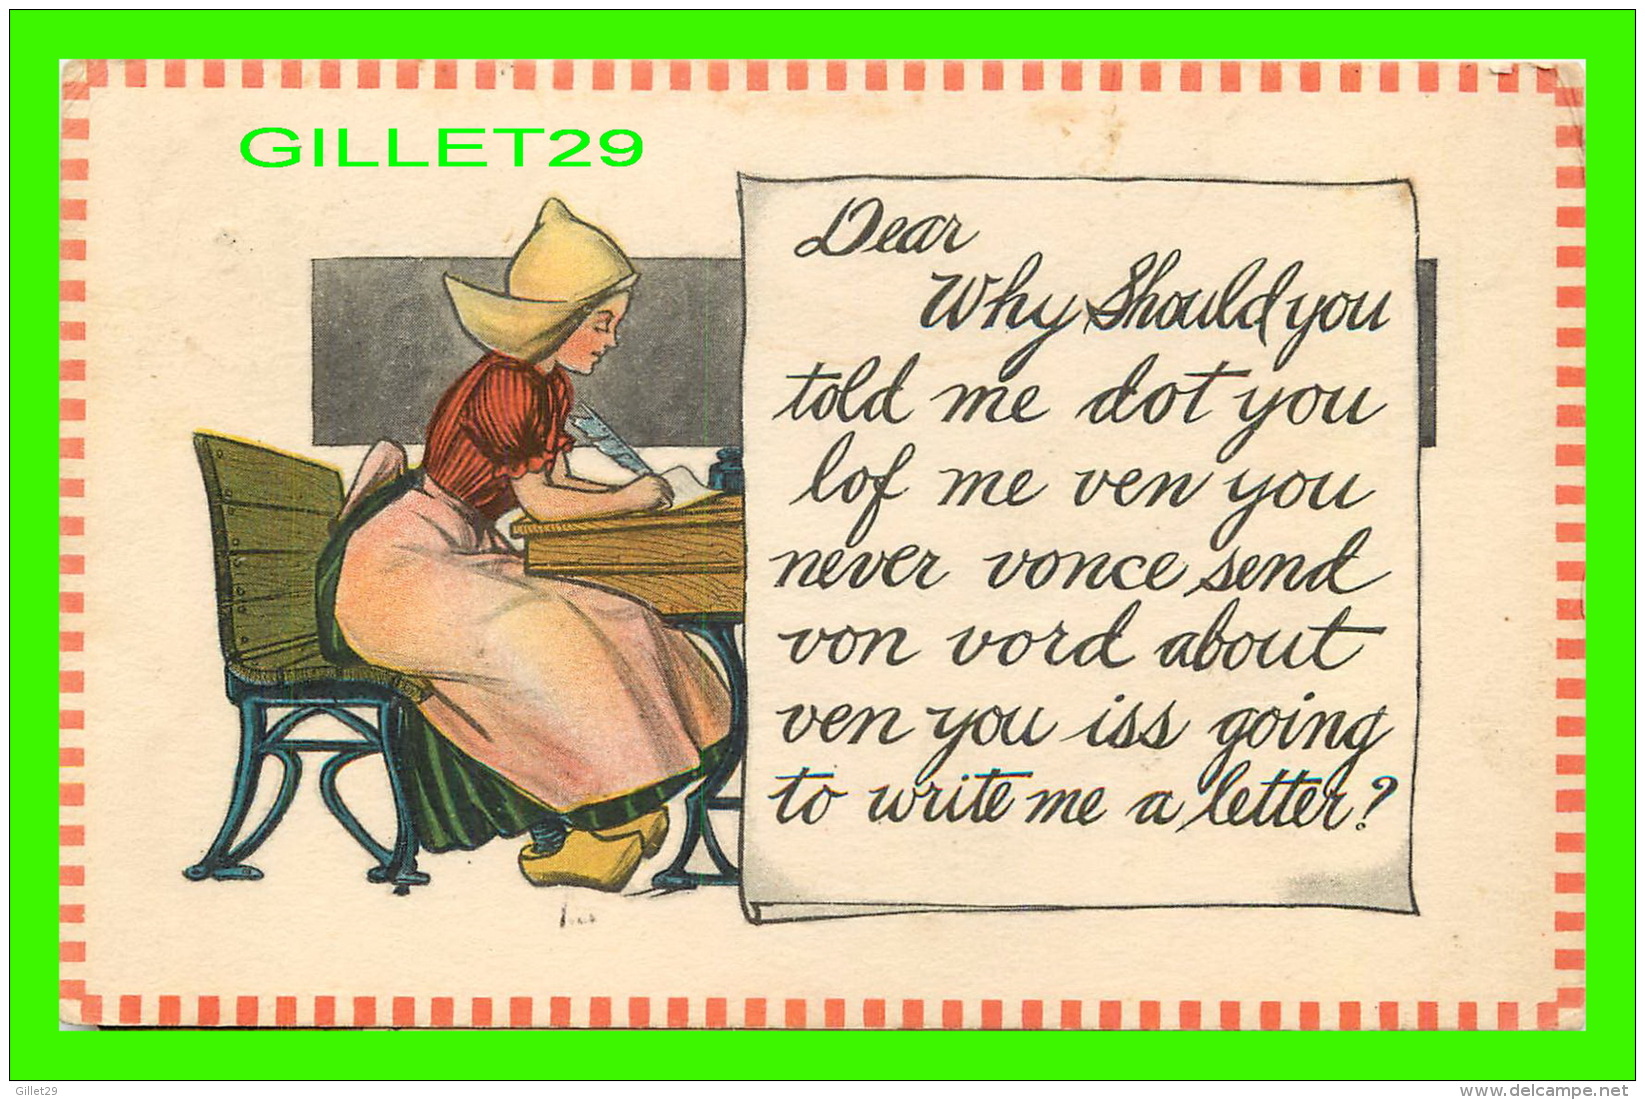 HUMOUR, COMICS - DEAR, WHY SHOULD YOU TOLD ME DOT YOU LOF ME VEN YOU - TRAVEL IN 1914 - - Humour